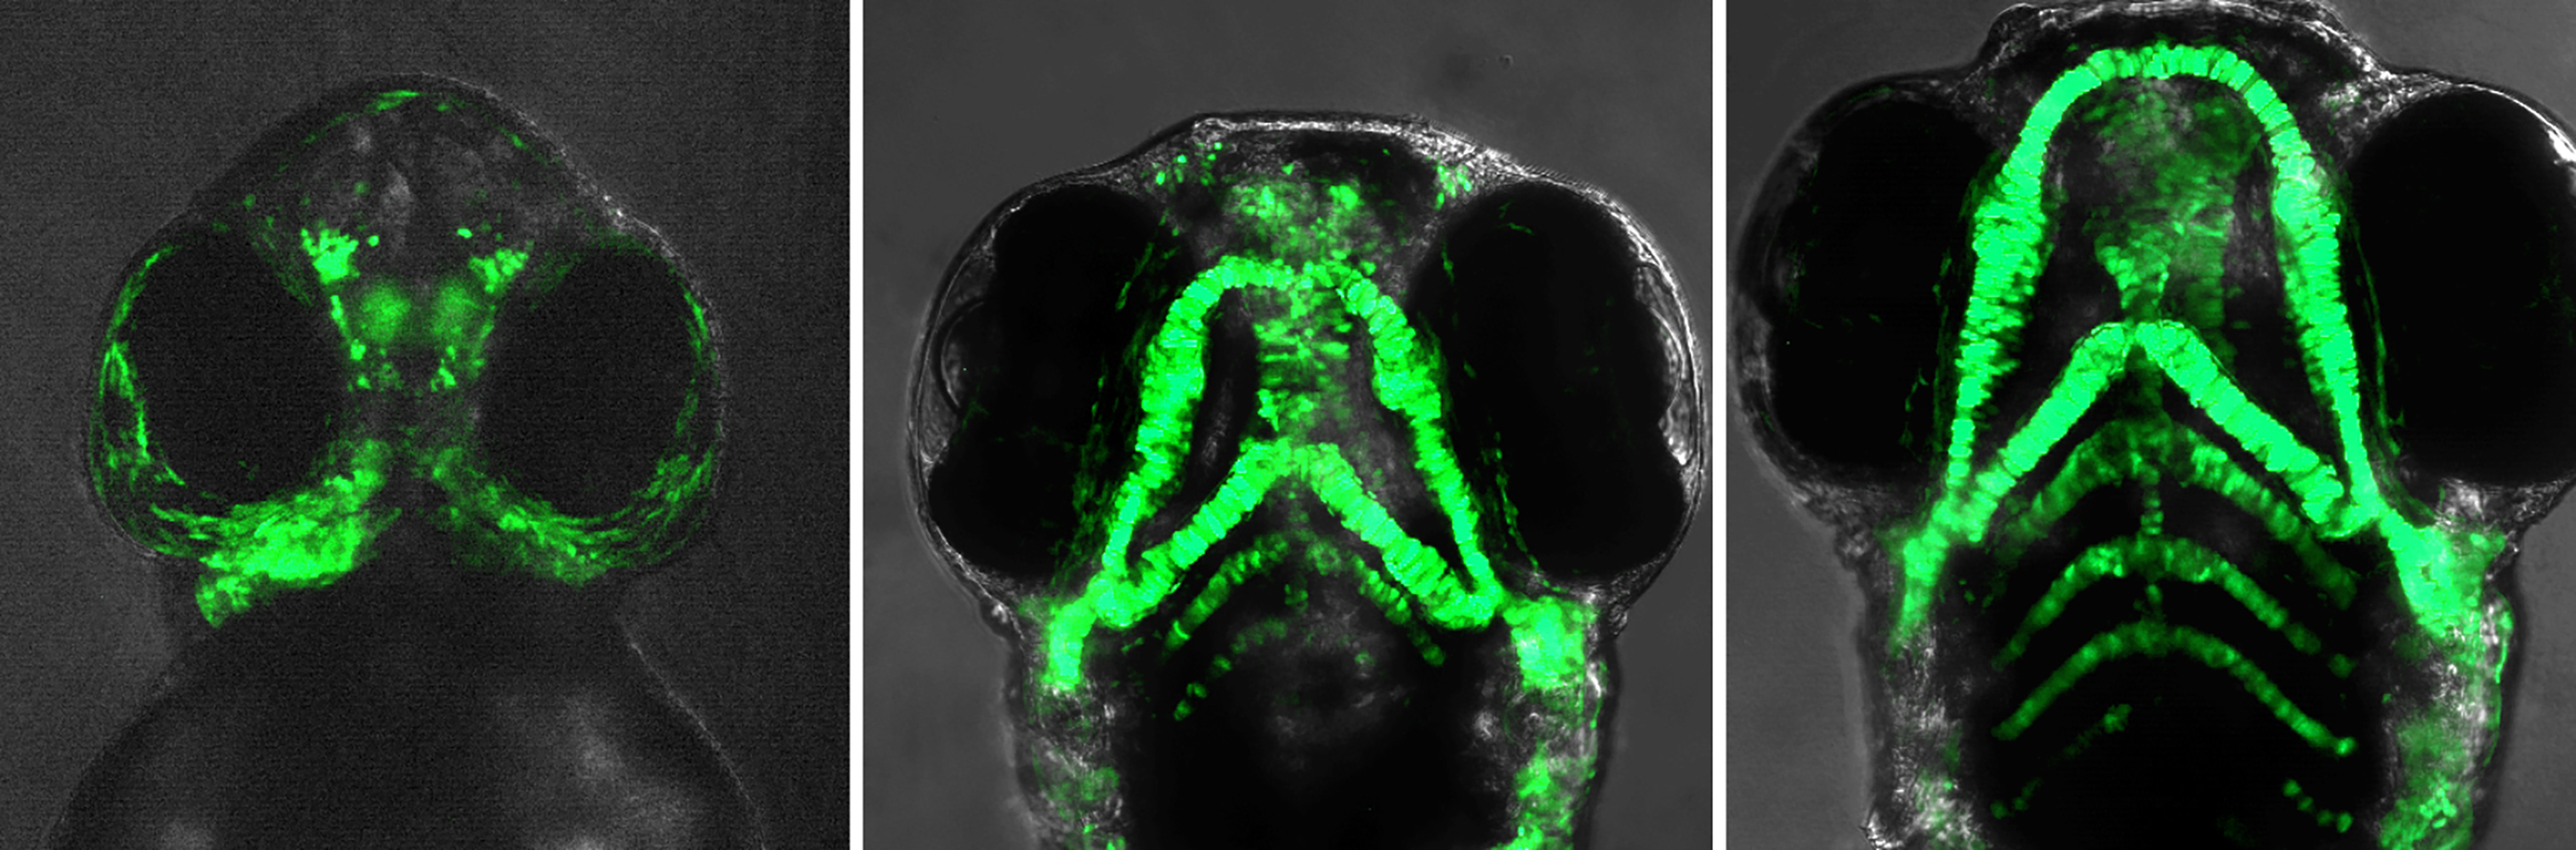 Three green fluorescent colored images showing growth of features of a zebrafish face over one to four days.